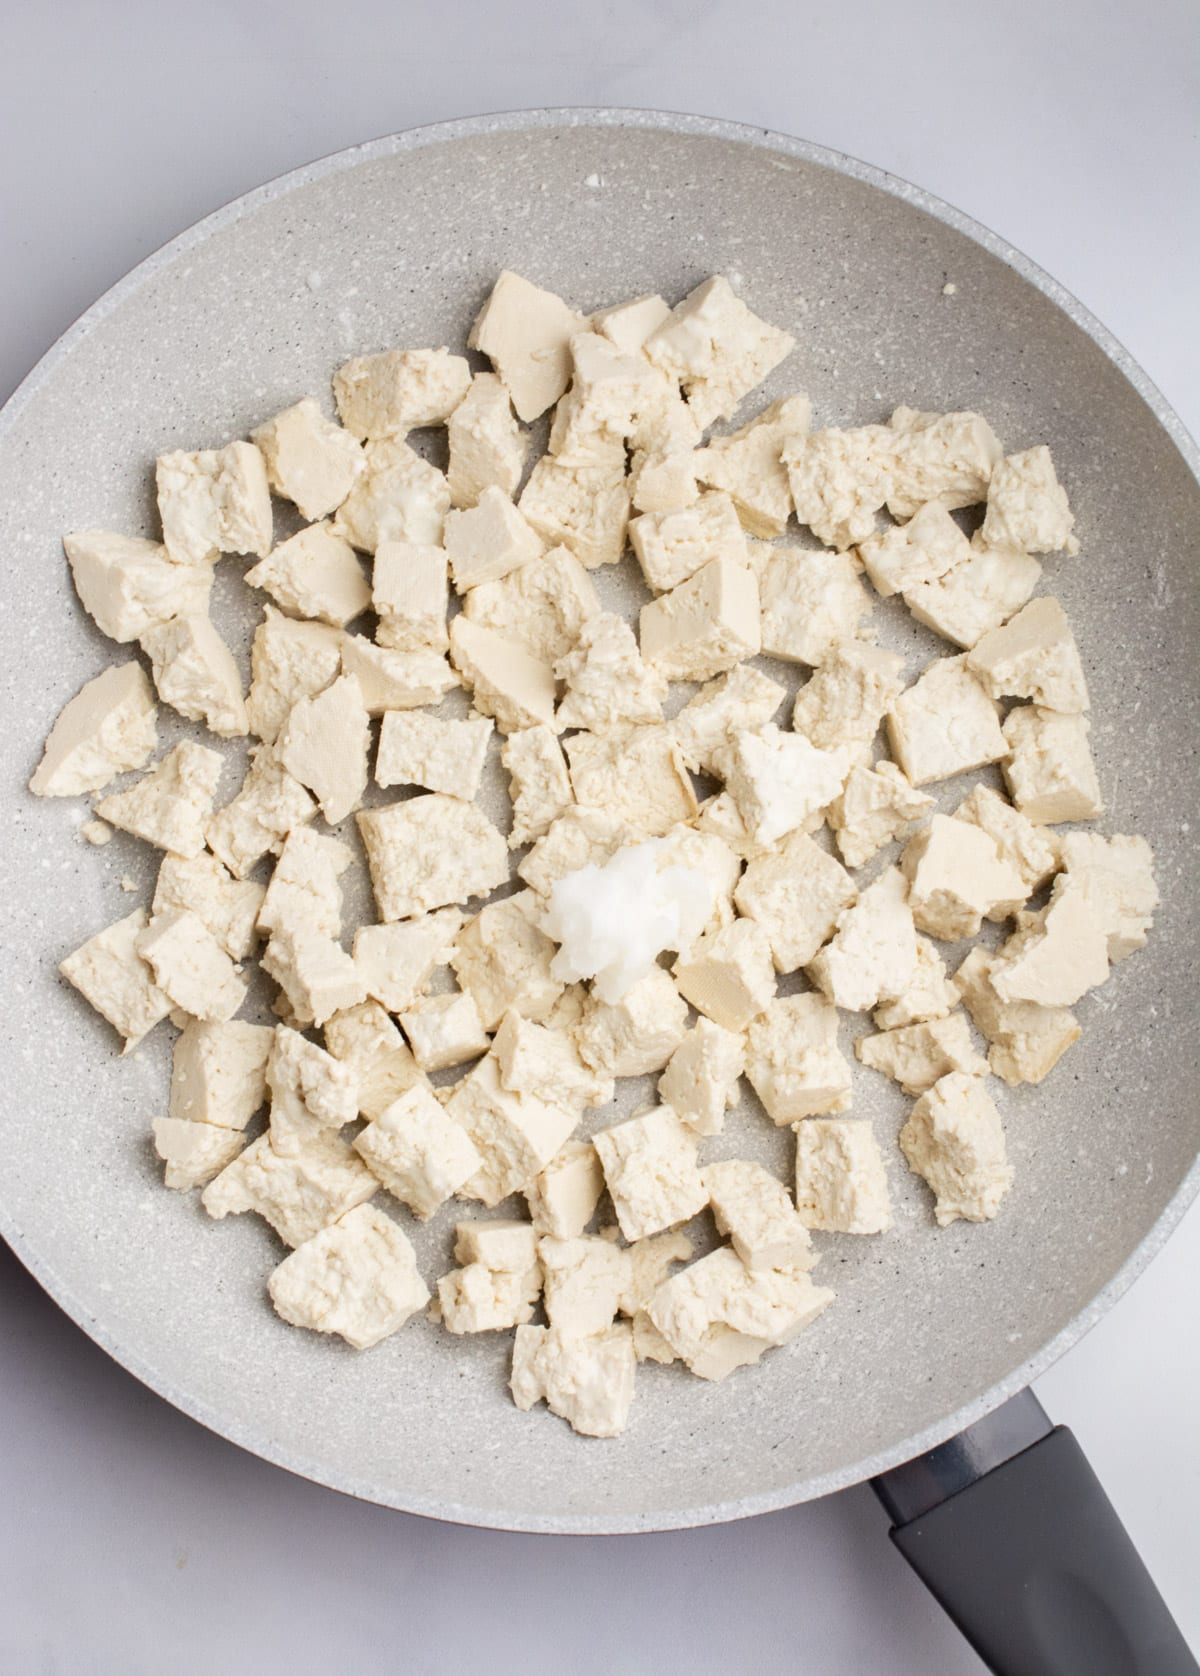 Bite sized tofu pieces in a pan with oil.